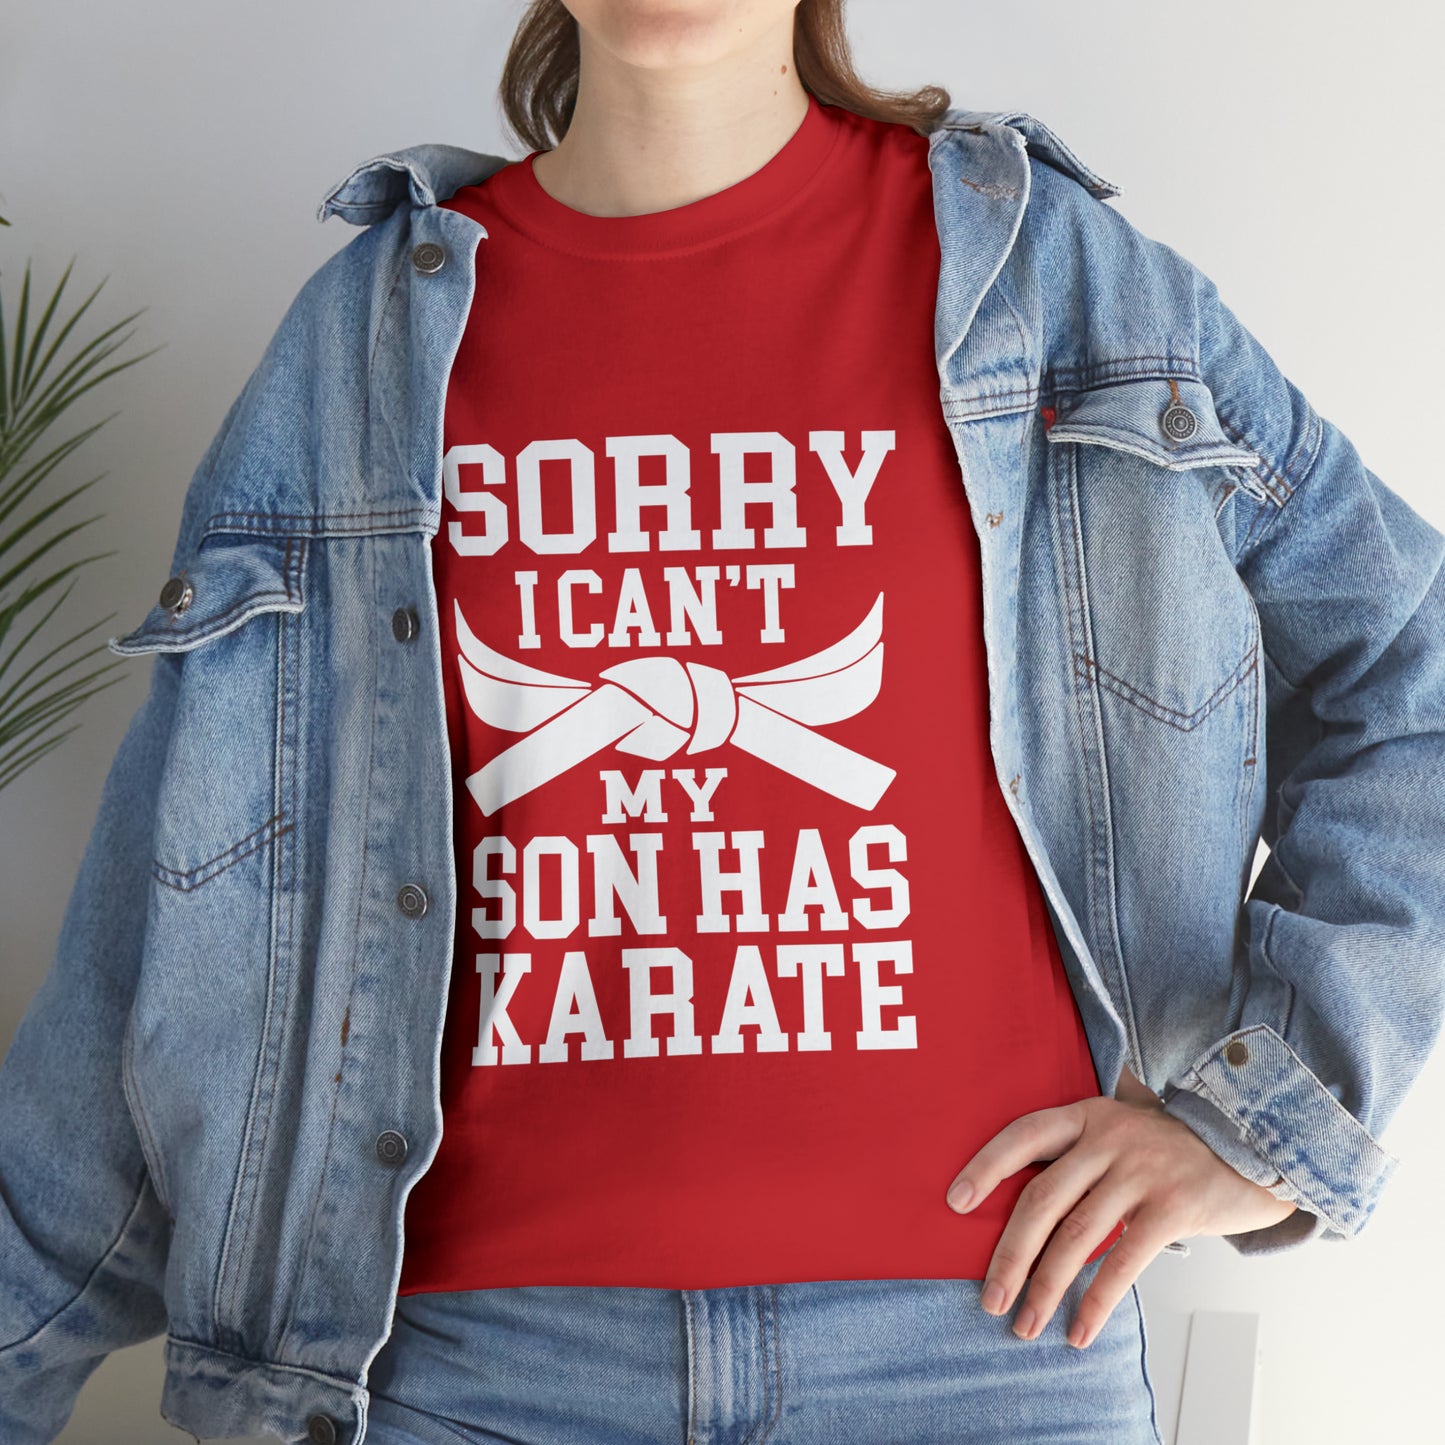 Sorry I Can't Karate Shirt, Shirt For Mom or Dad Heavy Cotton Tee